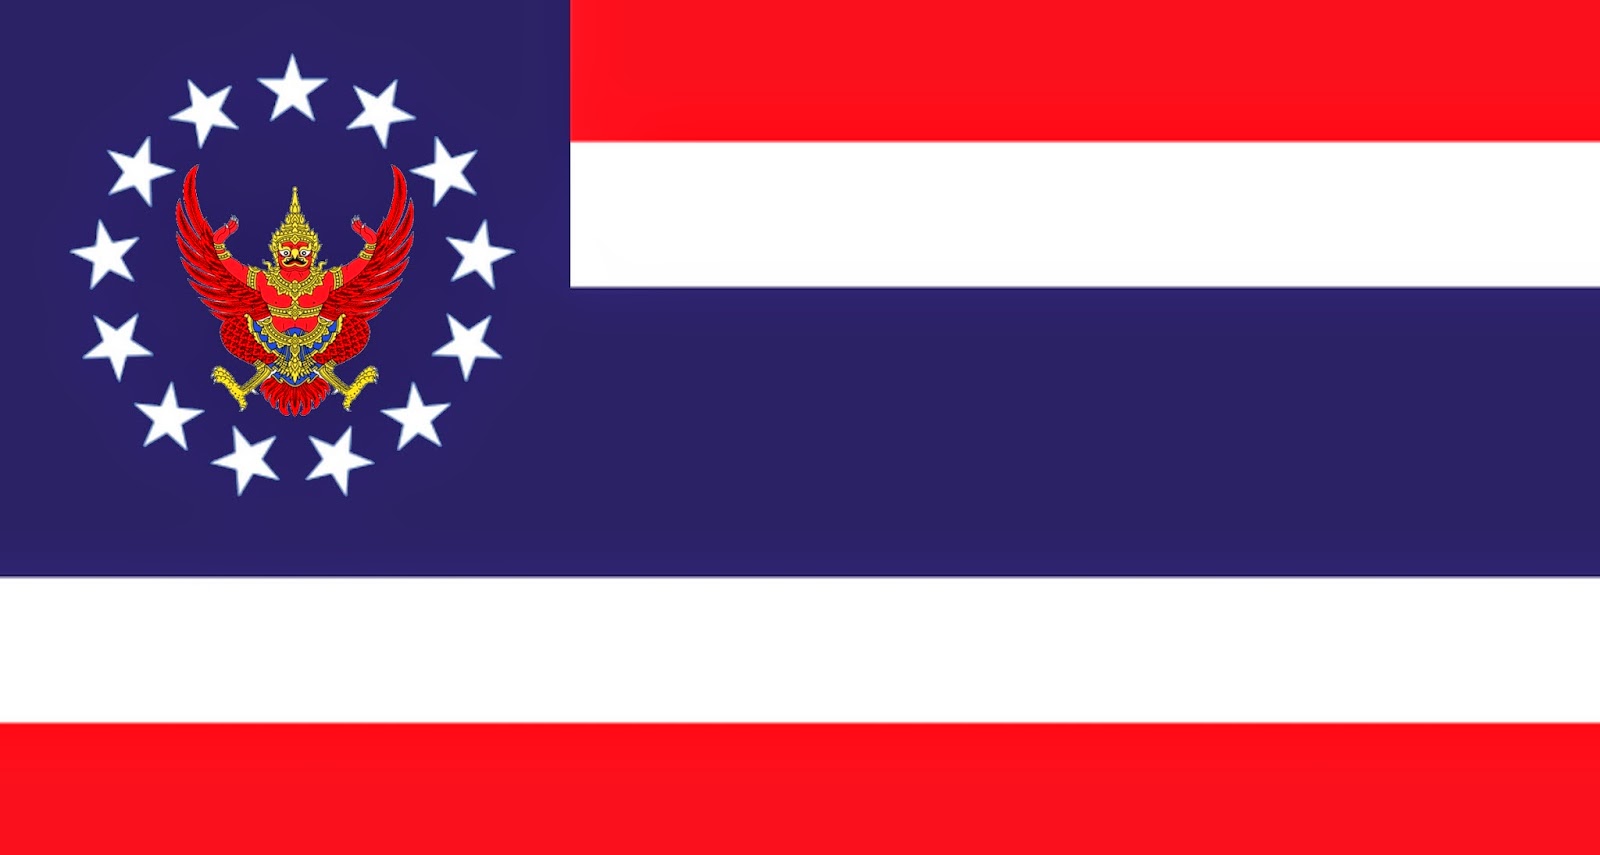 Flag design incorporating 13-star canton from the Betsy Ross flag used in the United States from 1777 until 1793 surrounding a Thai garuda emblem with the field made up of the Thailand national flag, adopted in September 1916.